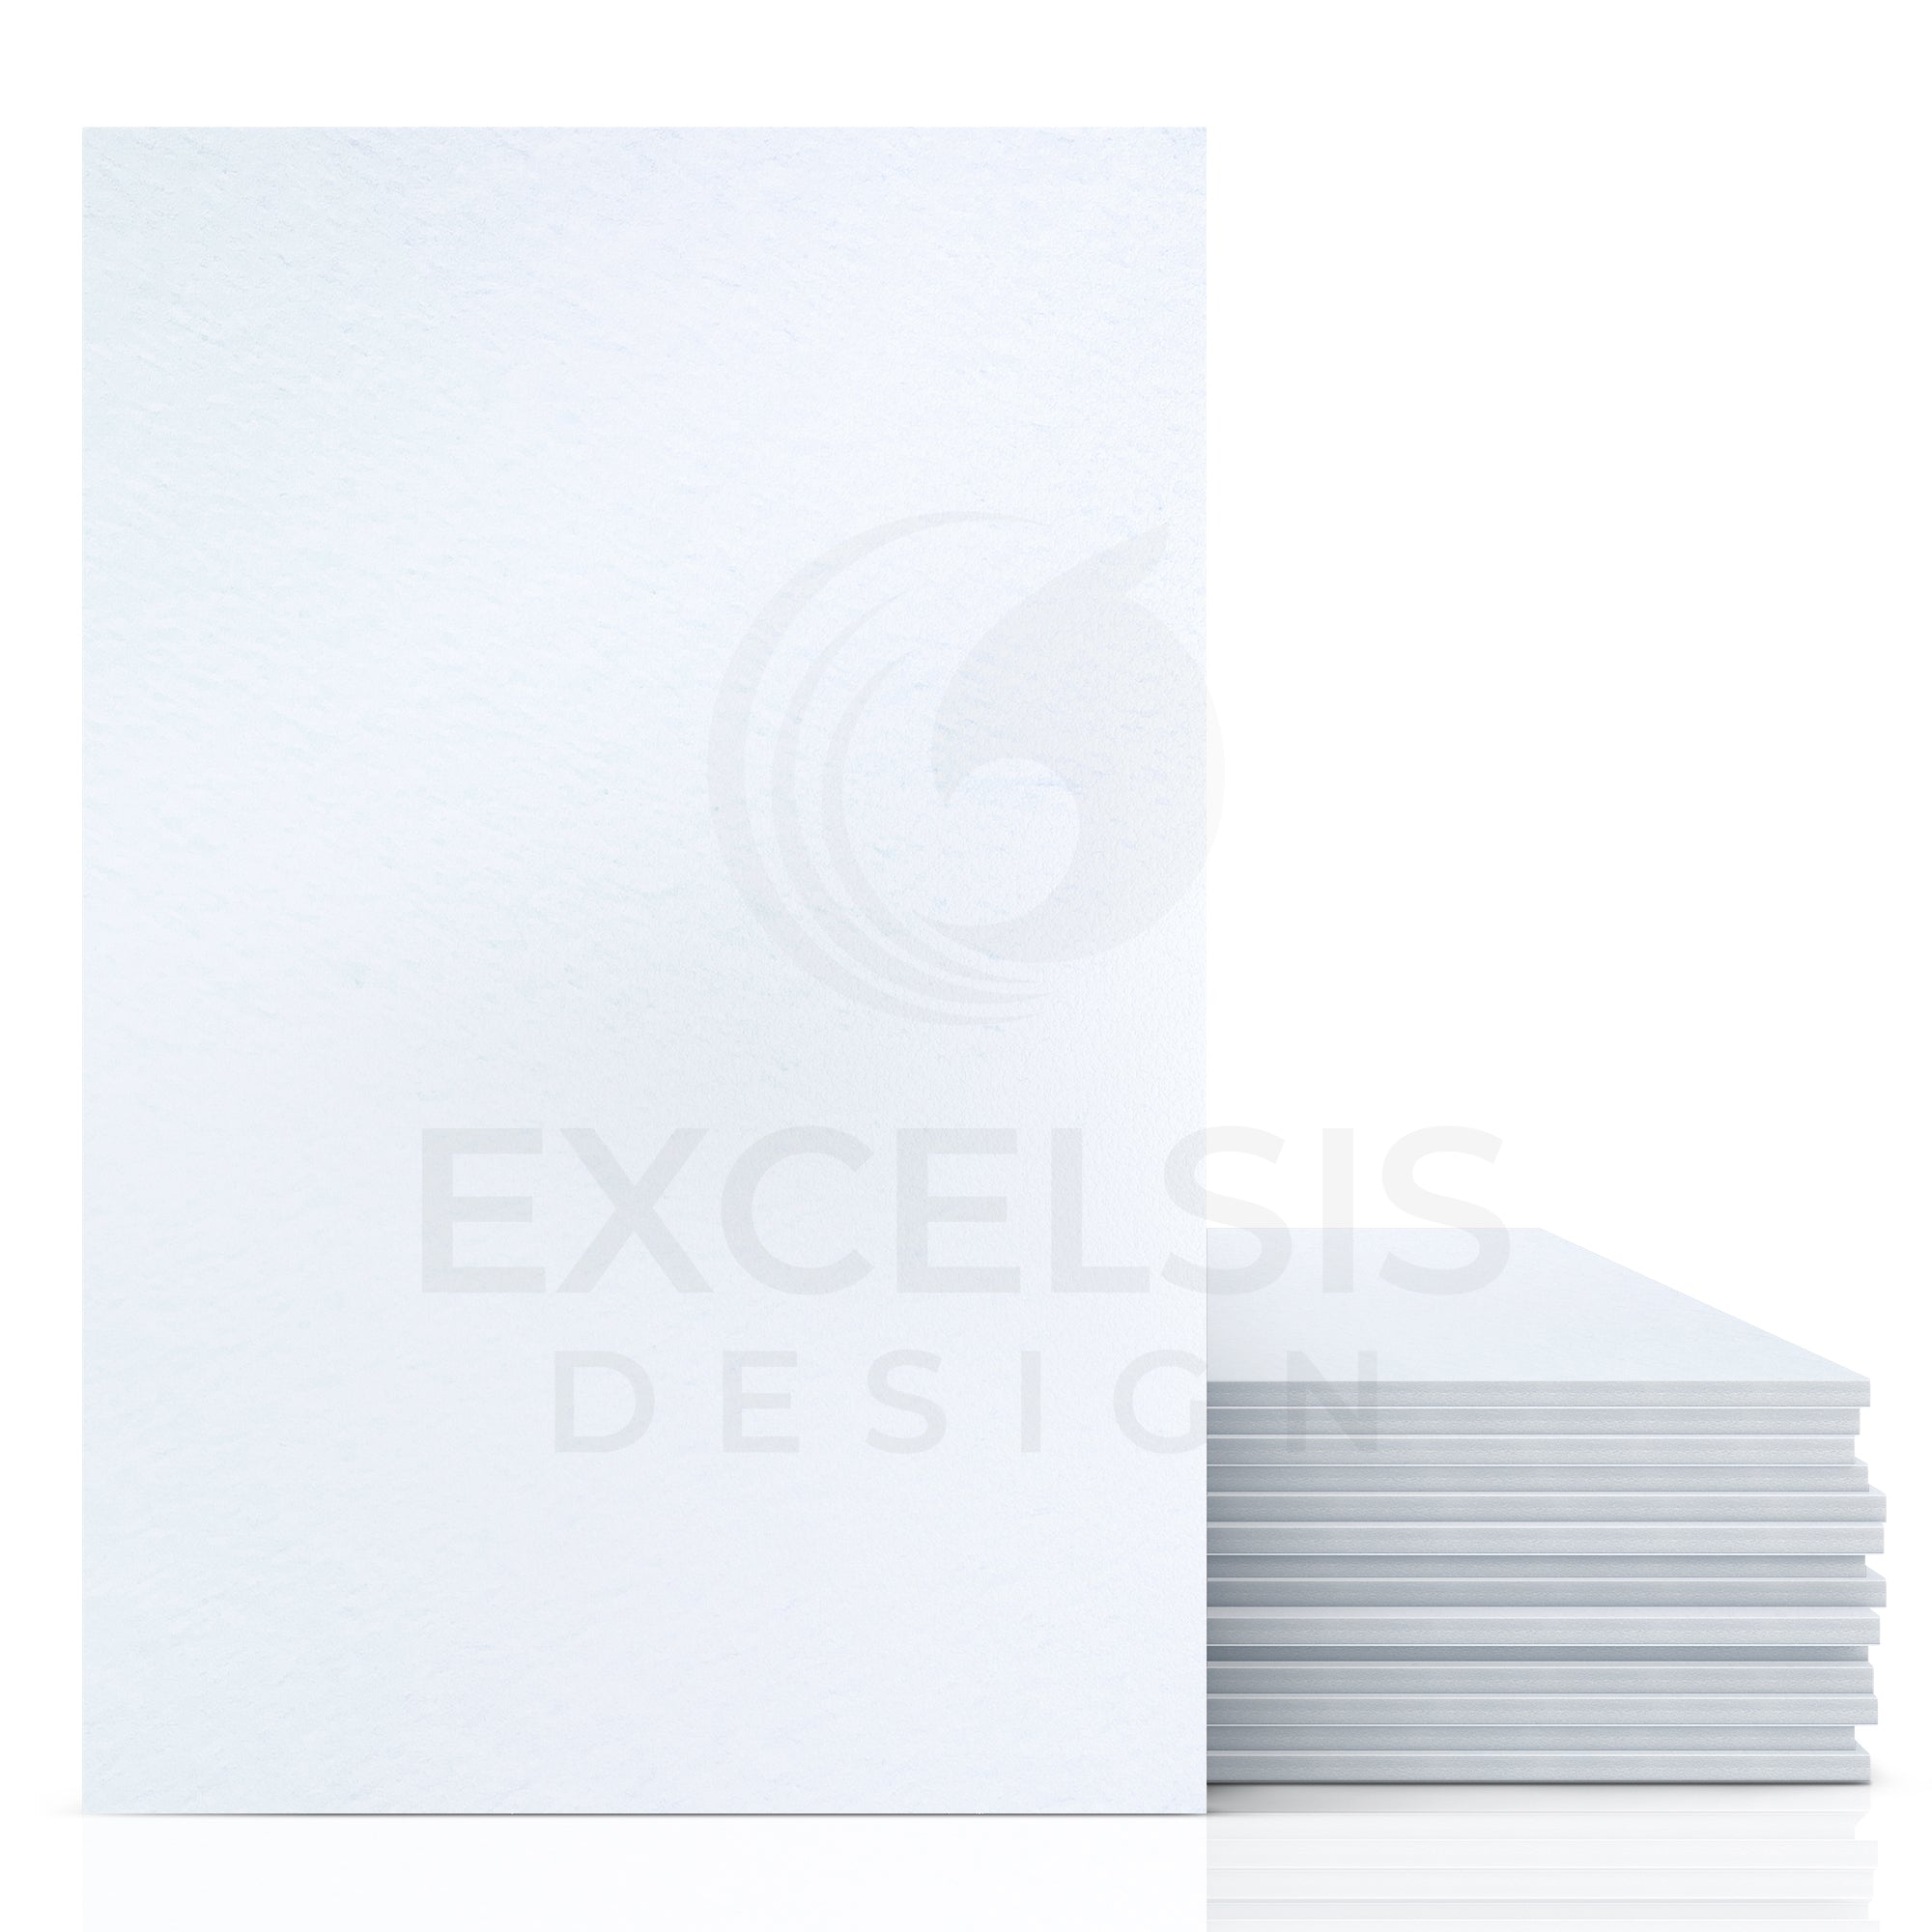 Excelsis Design 15 Pack Foam Board 20x30 Inches | White Foam Board 1/8 inch Thick White Core Mat | Backing Board for Presentations, Signboards, Arts